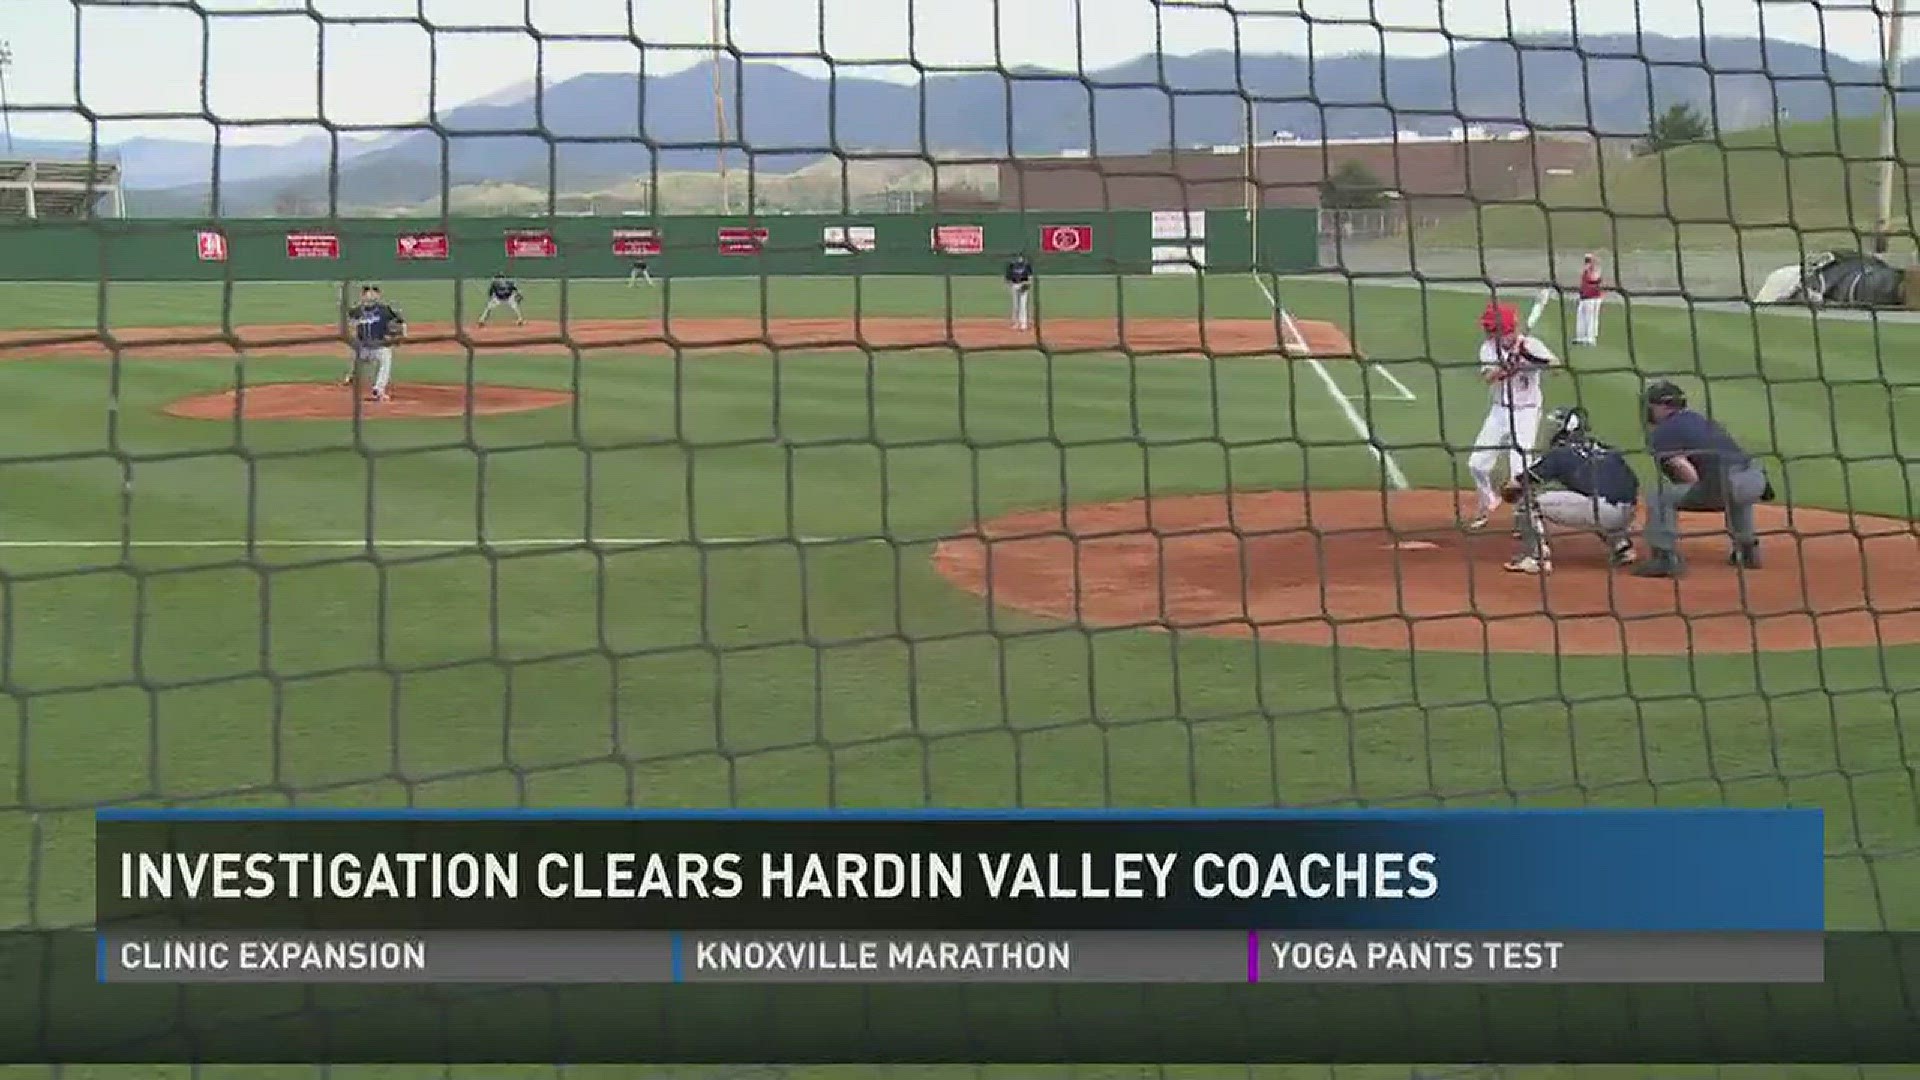 March 28, 2017: State authorities have cleared the Hardin Valley Academy head baseball coach and an assistant of any wrongdoing.